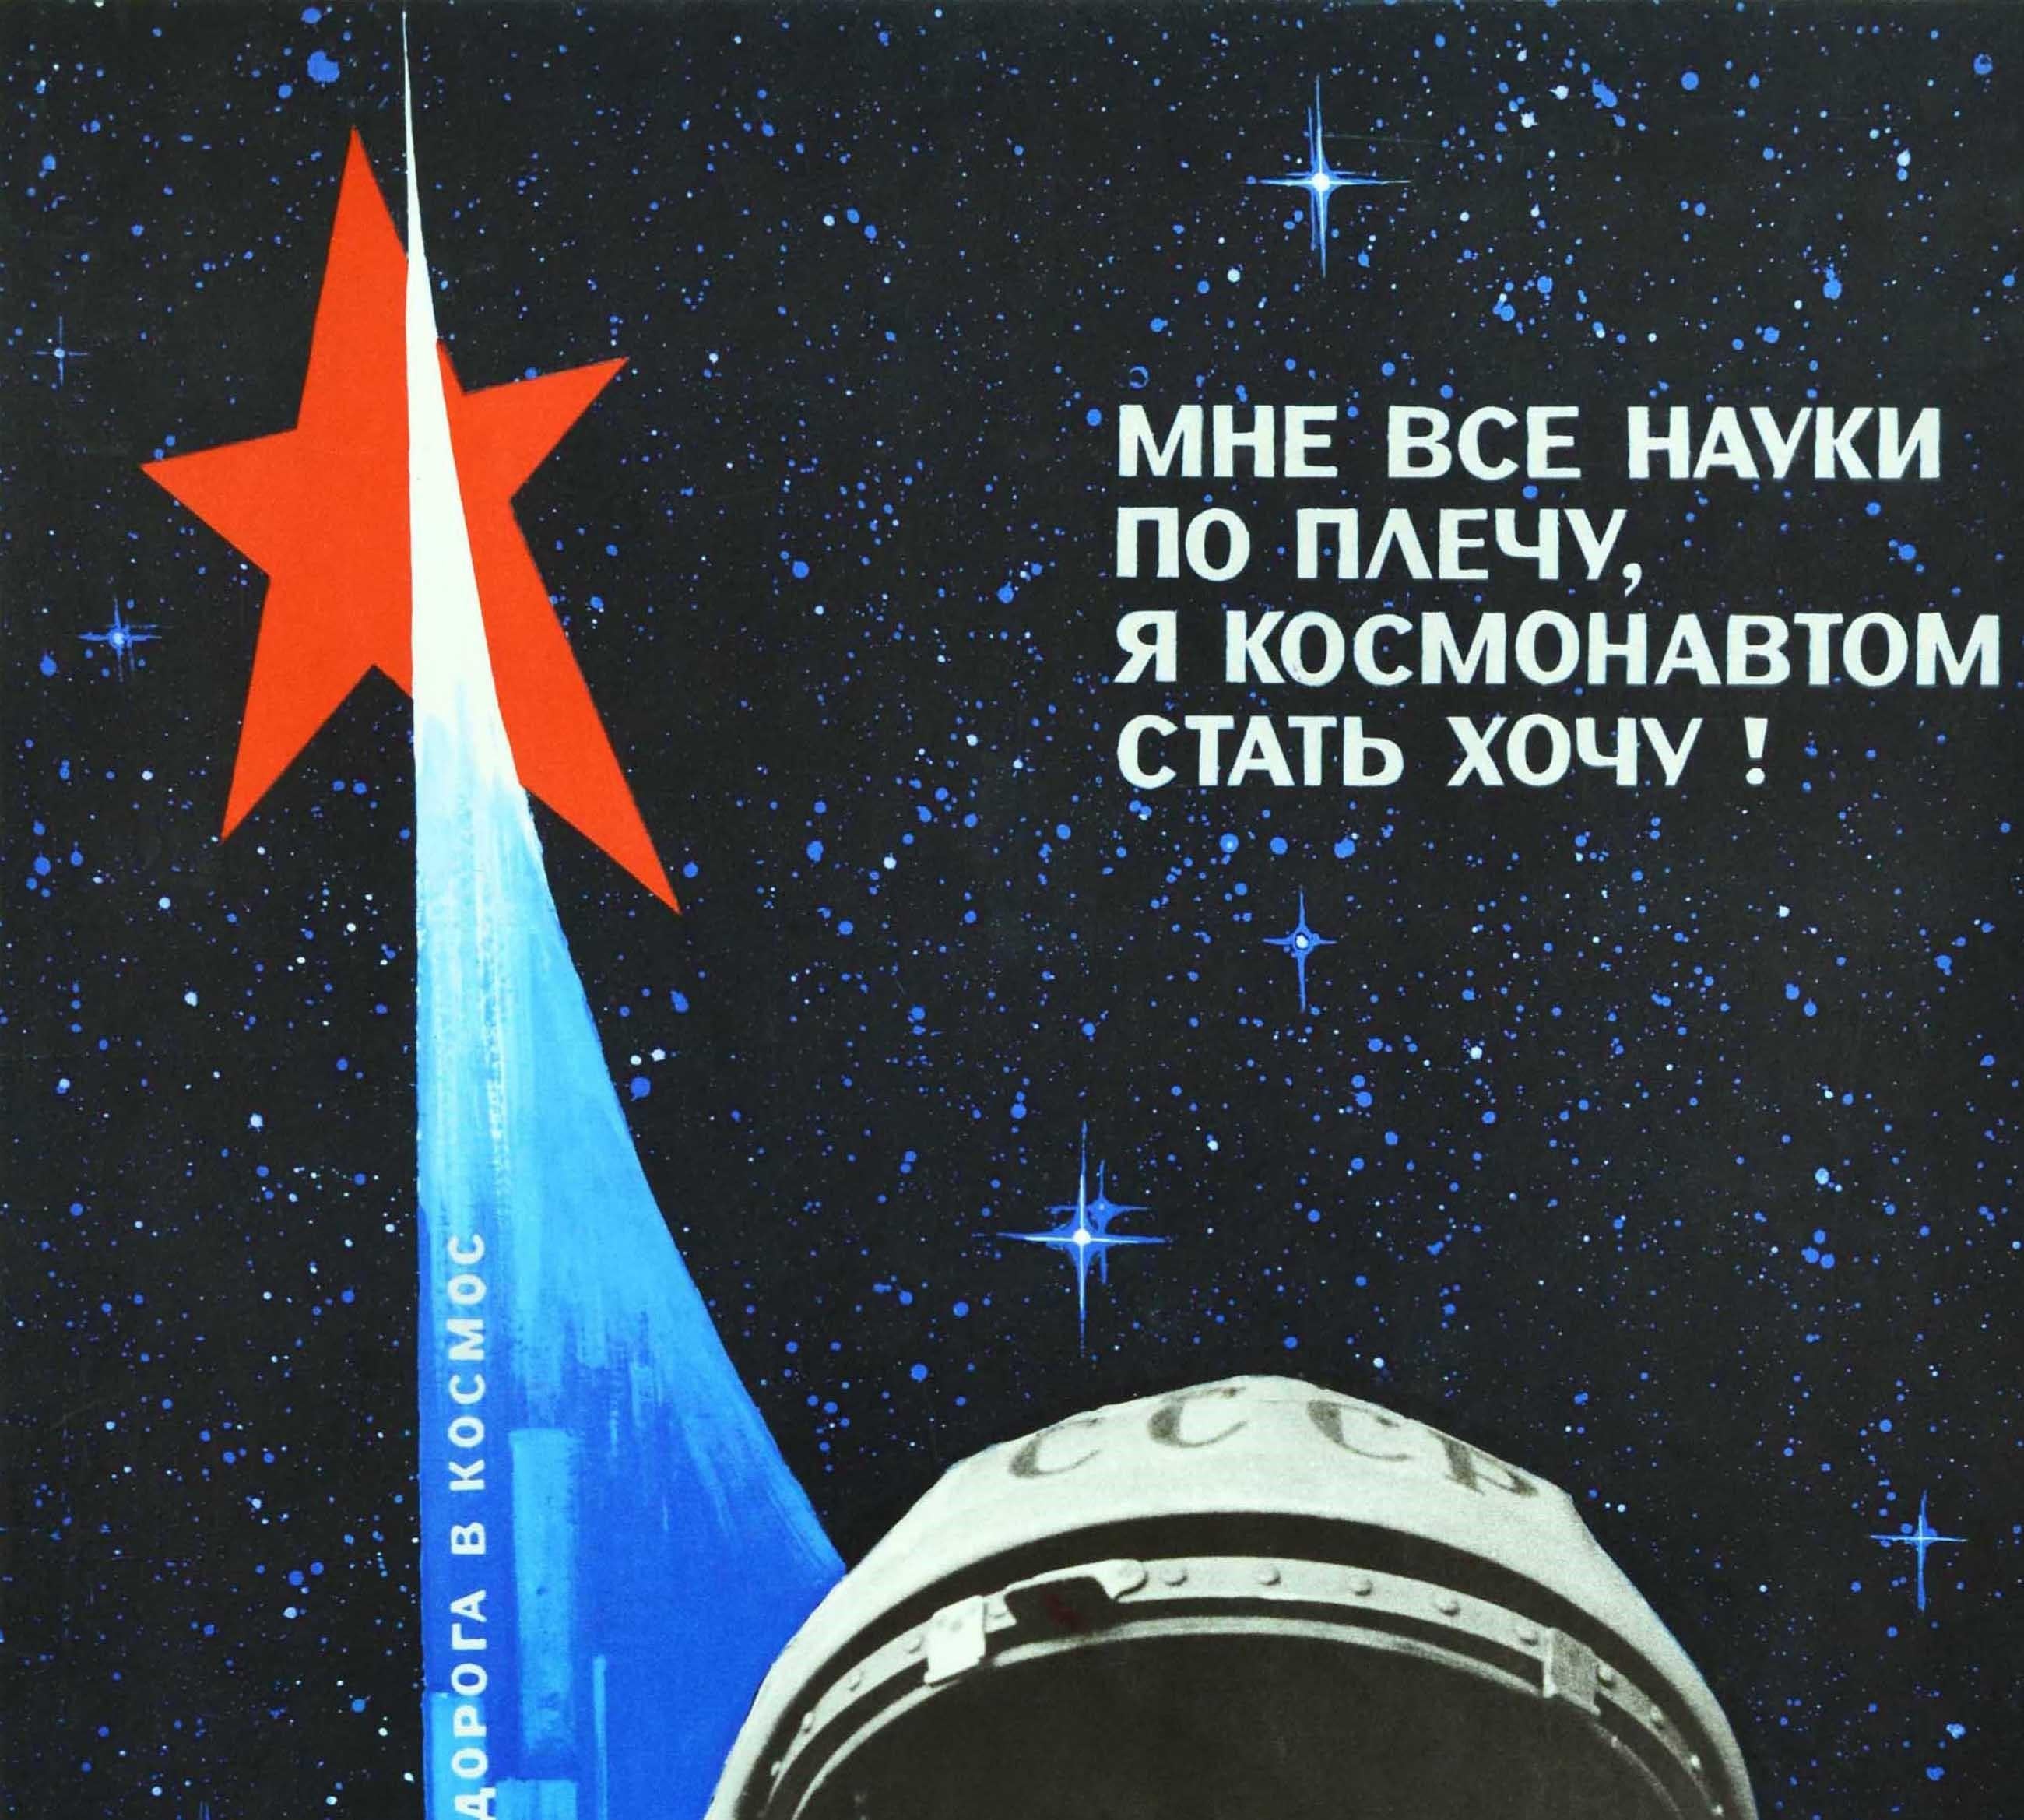 Original vintage Soviet space education propaganda poster - I can handle all the sciences, I want to become a cosmonaut! - featuring a black and white photograph of a smiling boy in a CCCP / USSR cosmonaut space suit with a pioneer tie in red around